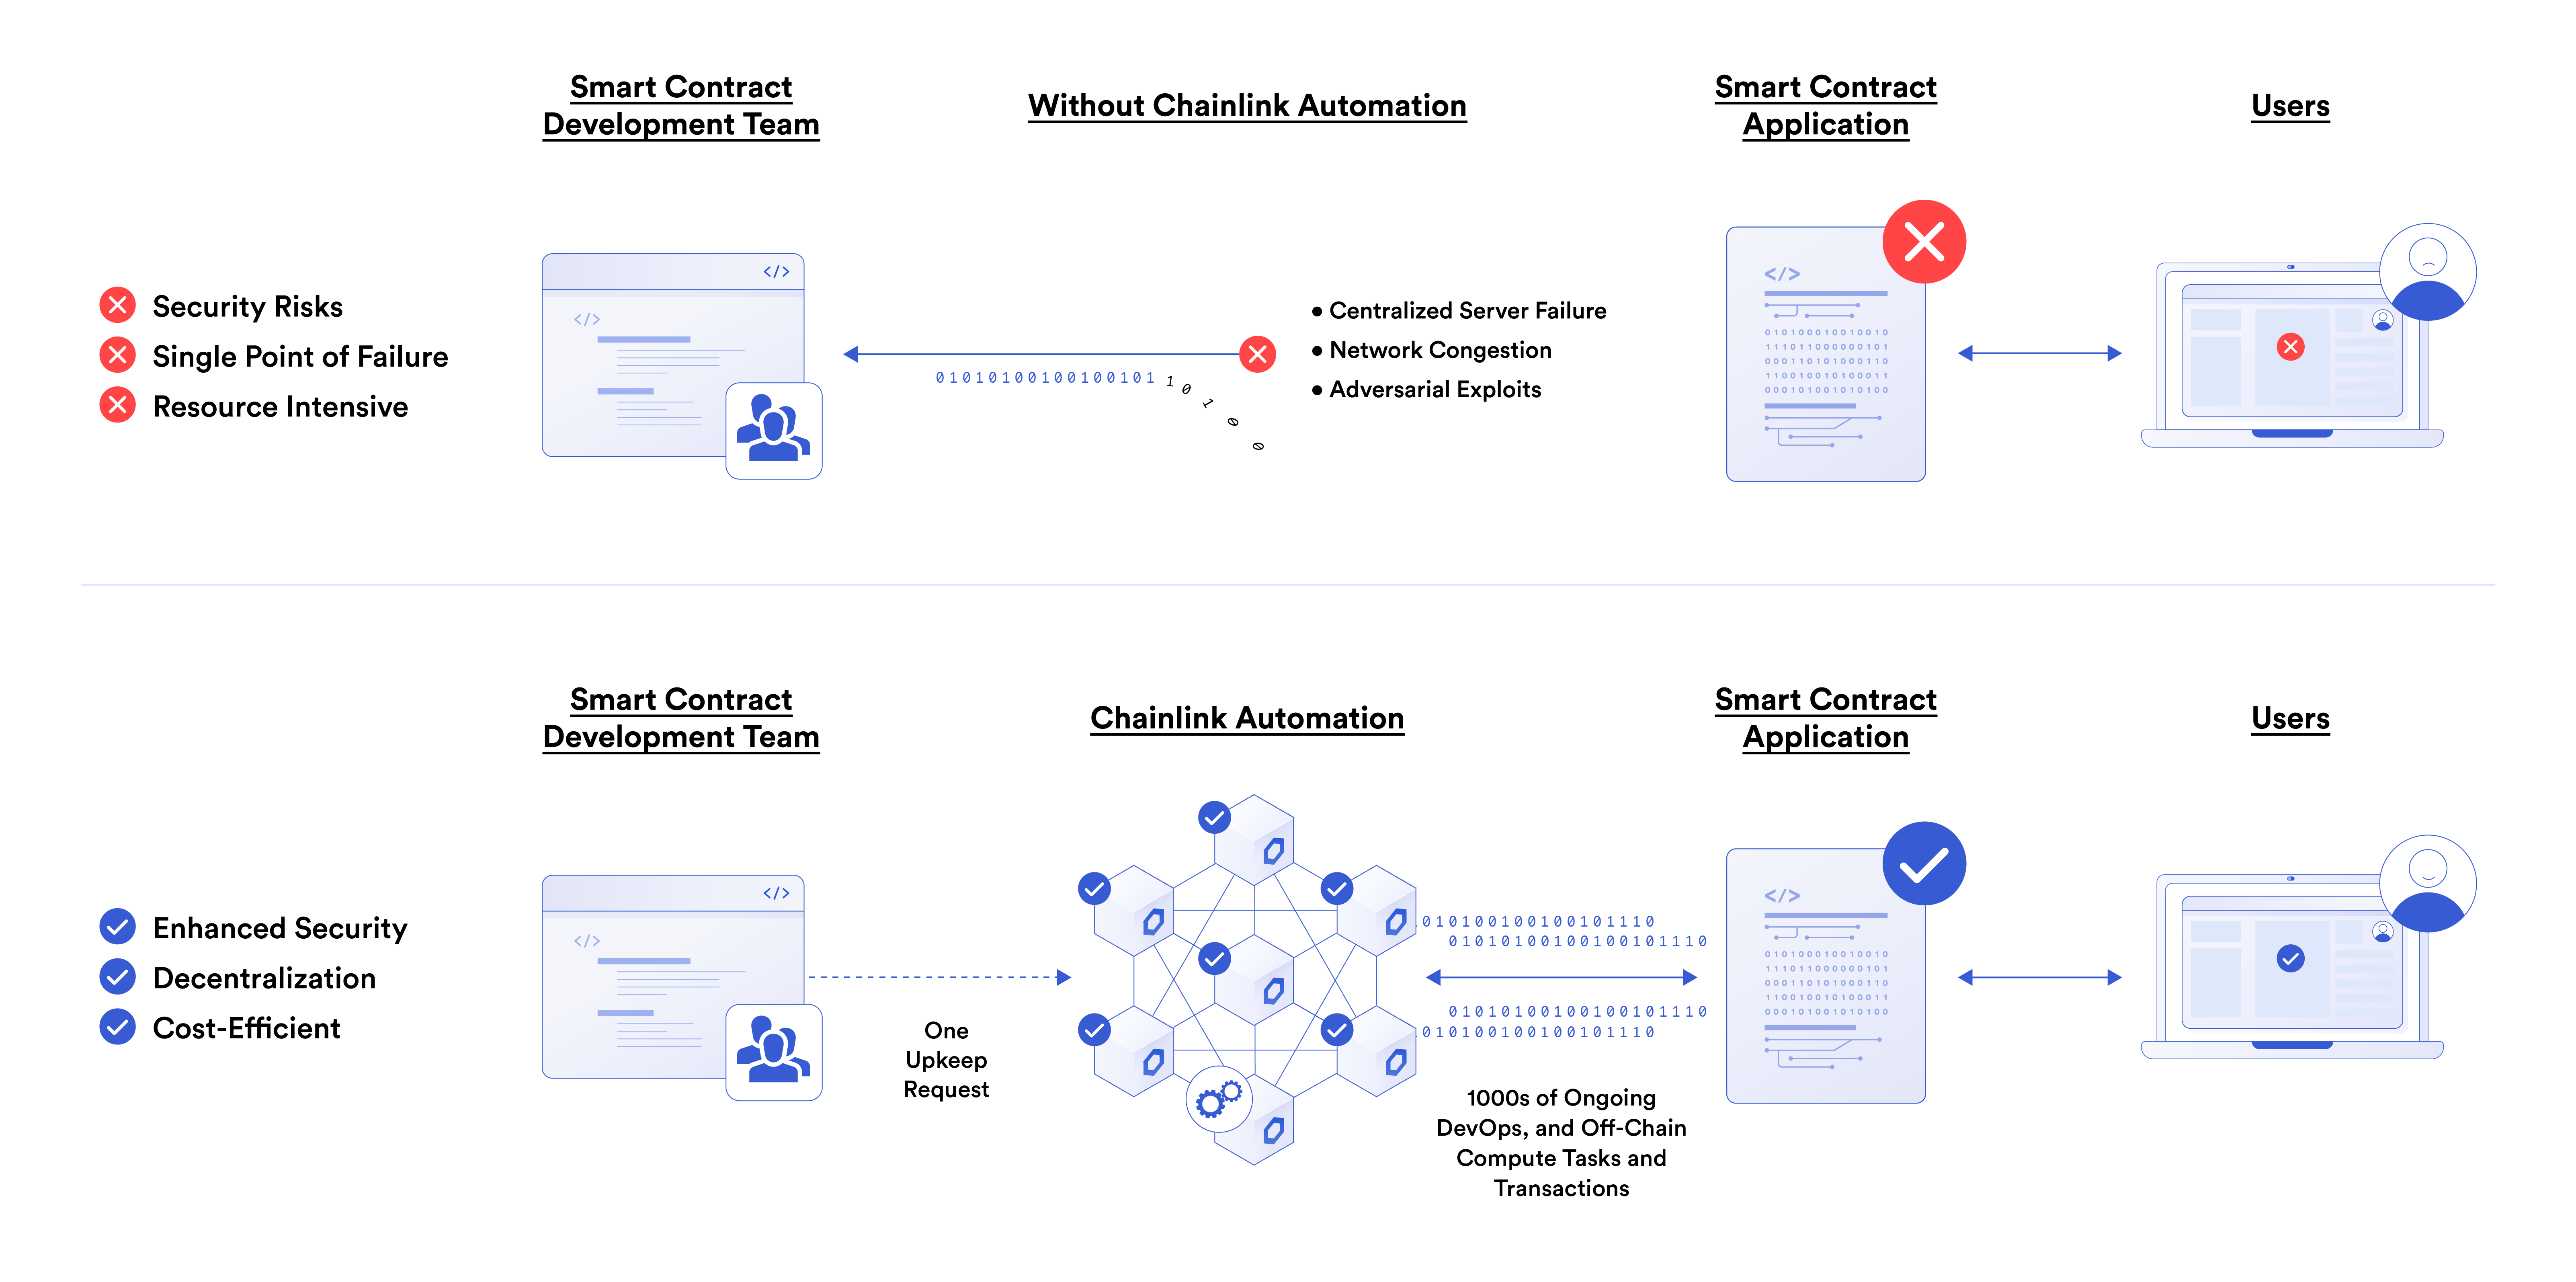 A diagram showing how Chainlink Automation offers enhanced security, decentralization, and cost-efficiency.